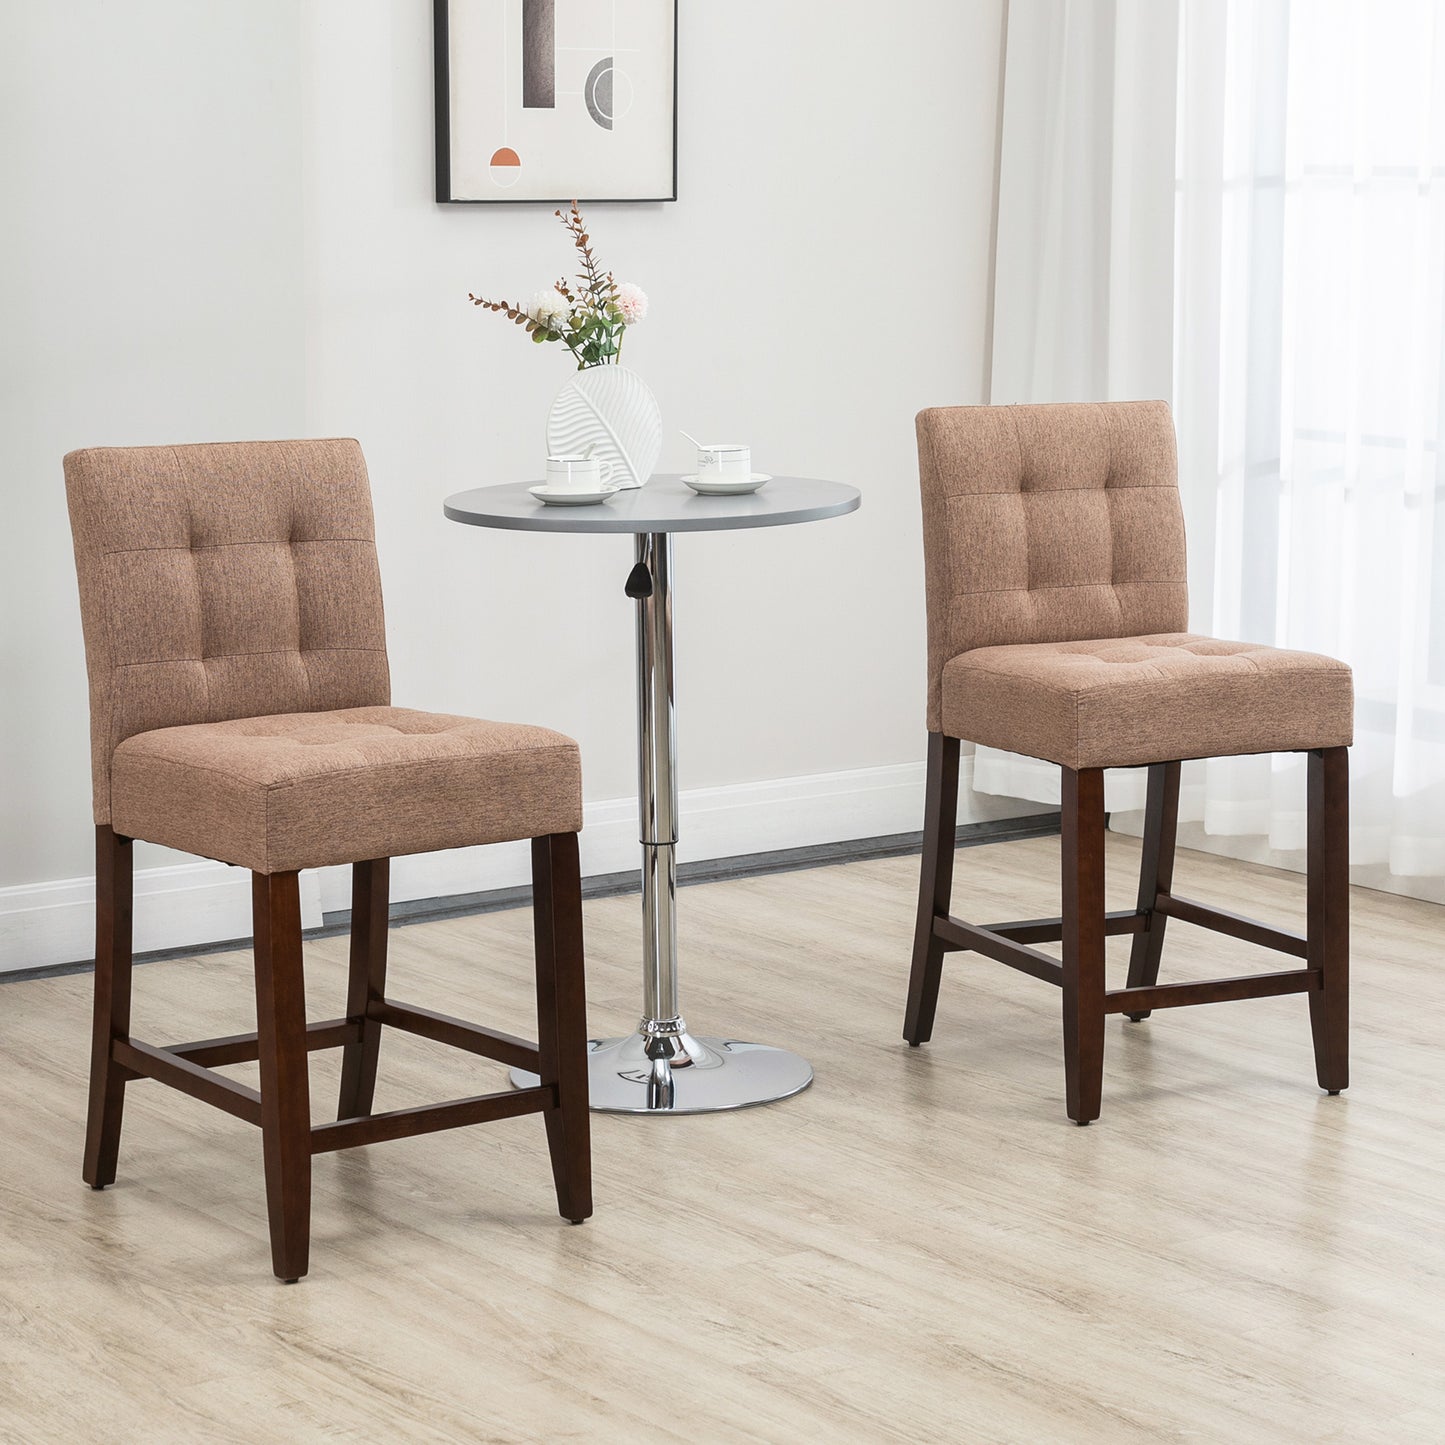 HOMCOM Modern Fabric Bar Stools Set of 2, Thick Padding Kitchen Stool, Bar Chairs with Tufted Back Wood Legs, Brown